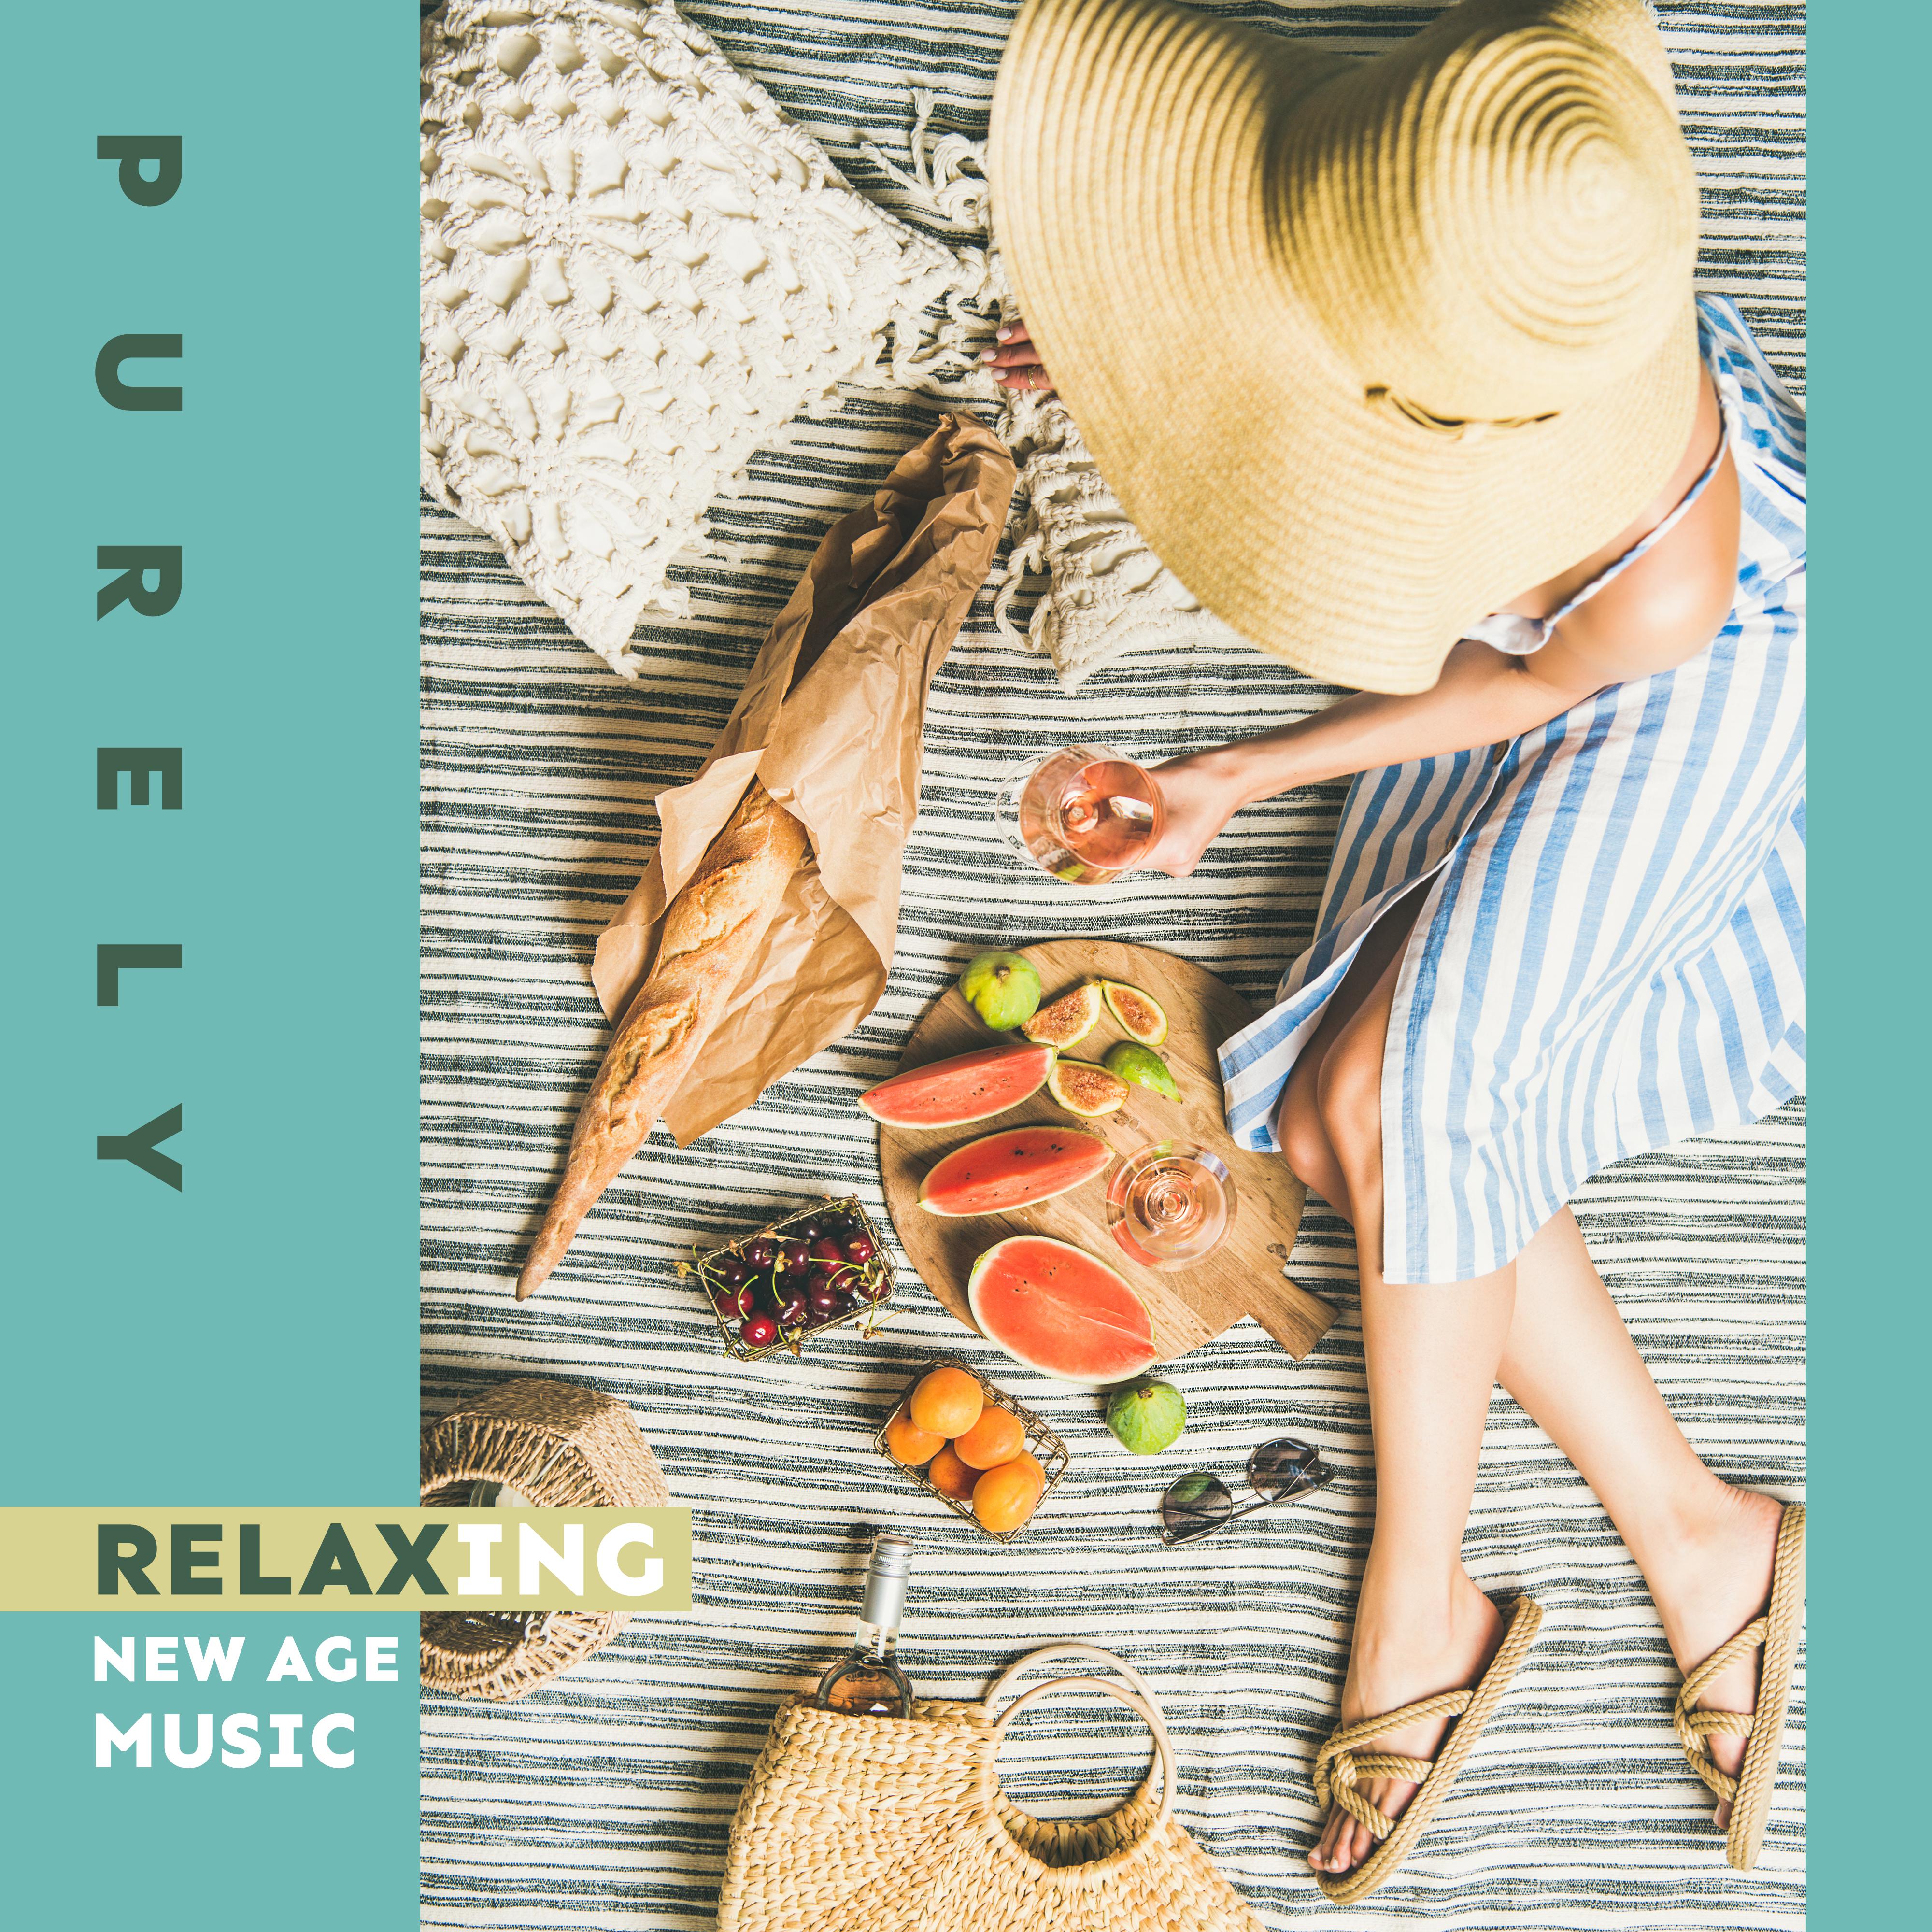 Purely Relaxing New Age Music (15 Tracks to Help You Calm Down, Relieve Stress, Breathe, Rest, Relax or Unwind)